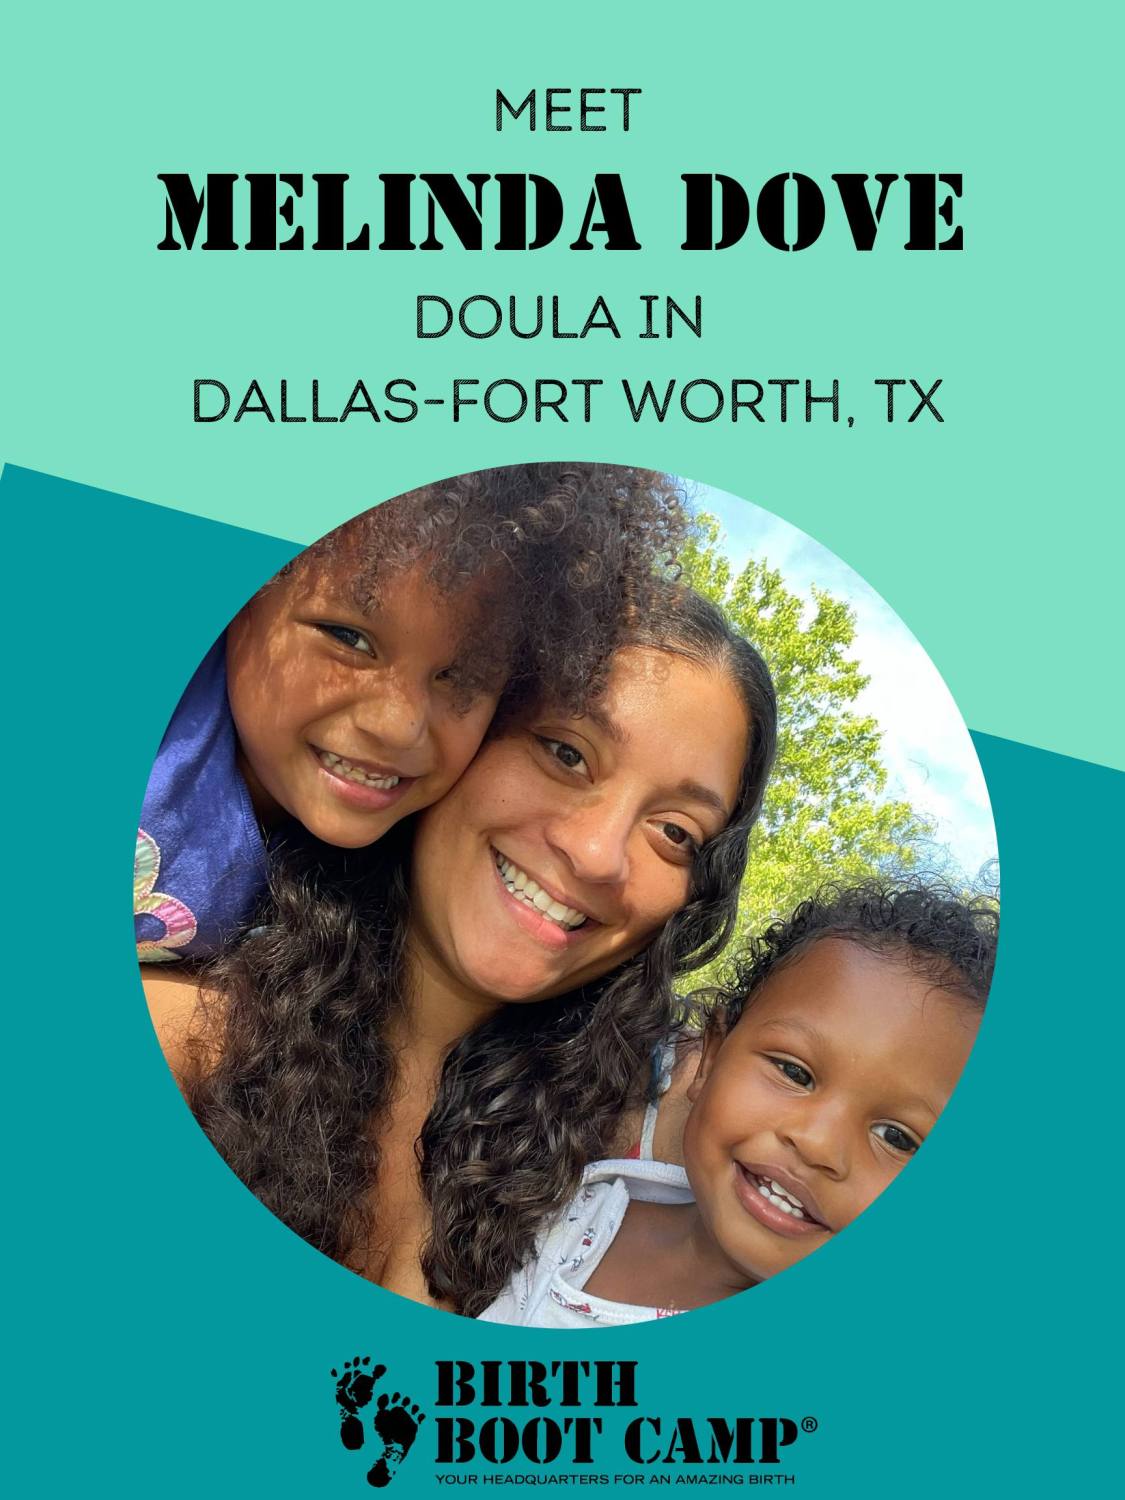 Meet Birth Boot Camp Doula – Melinda Dove in Dallas Fort Worth, TX